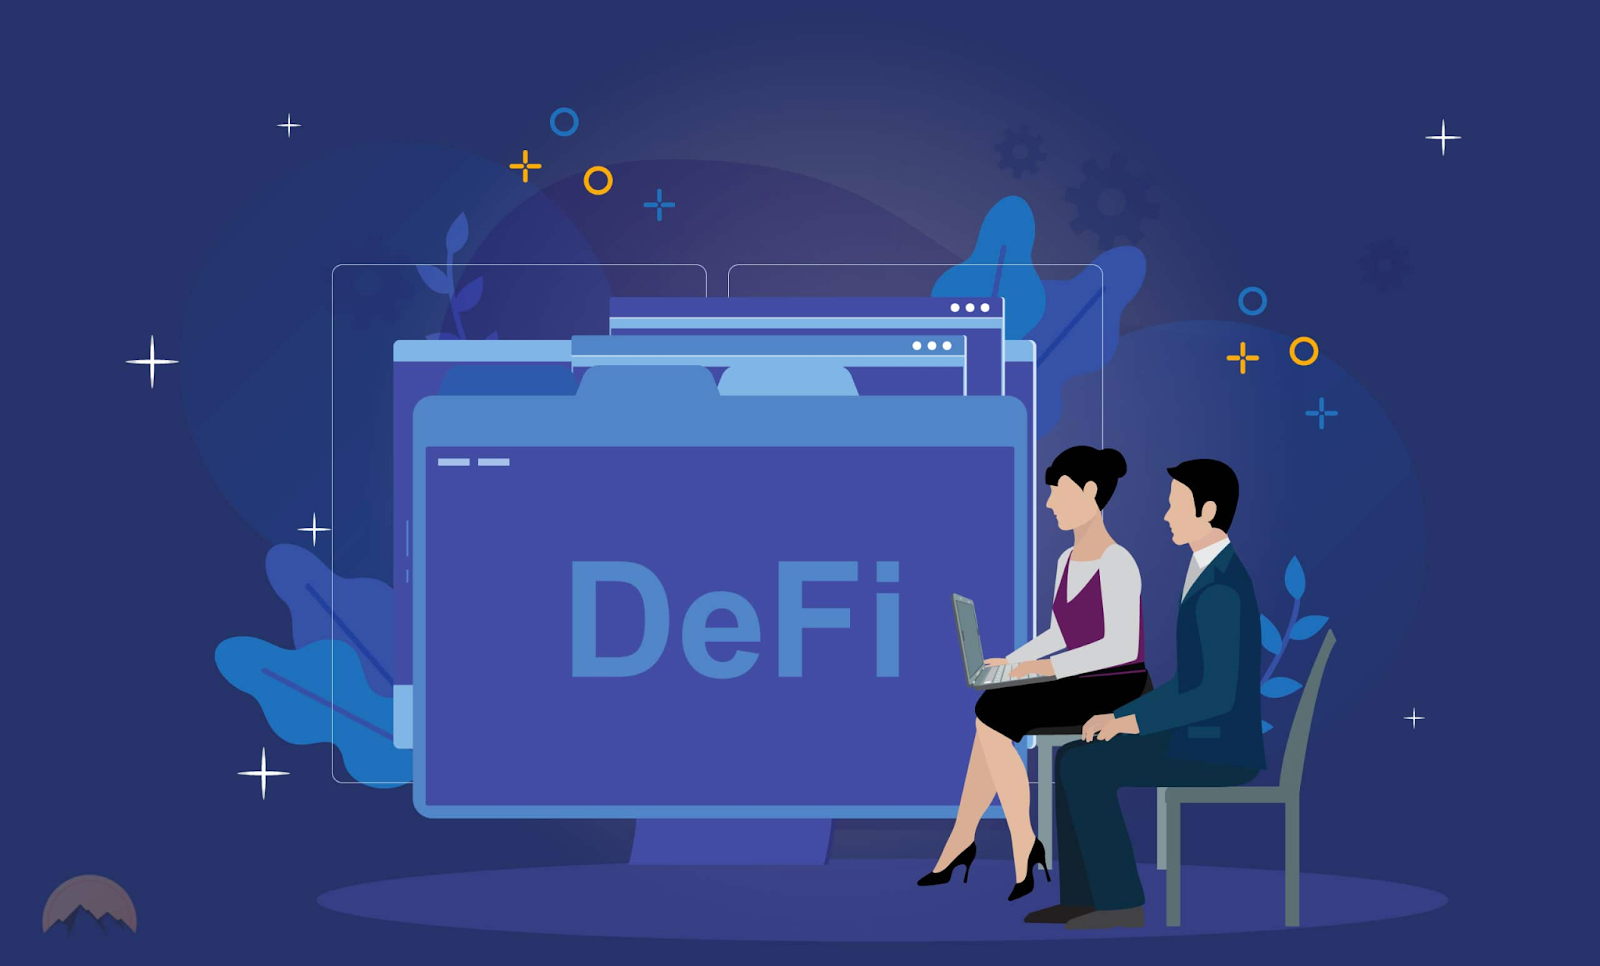 How to build the best DeFi app ever?